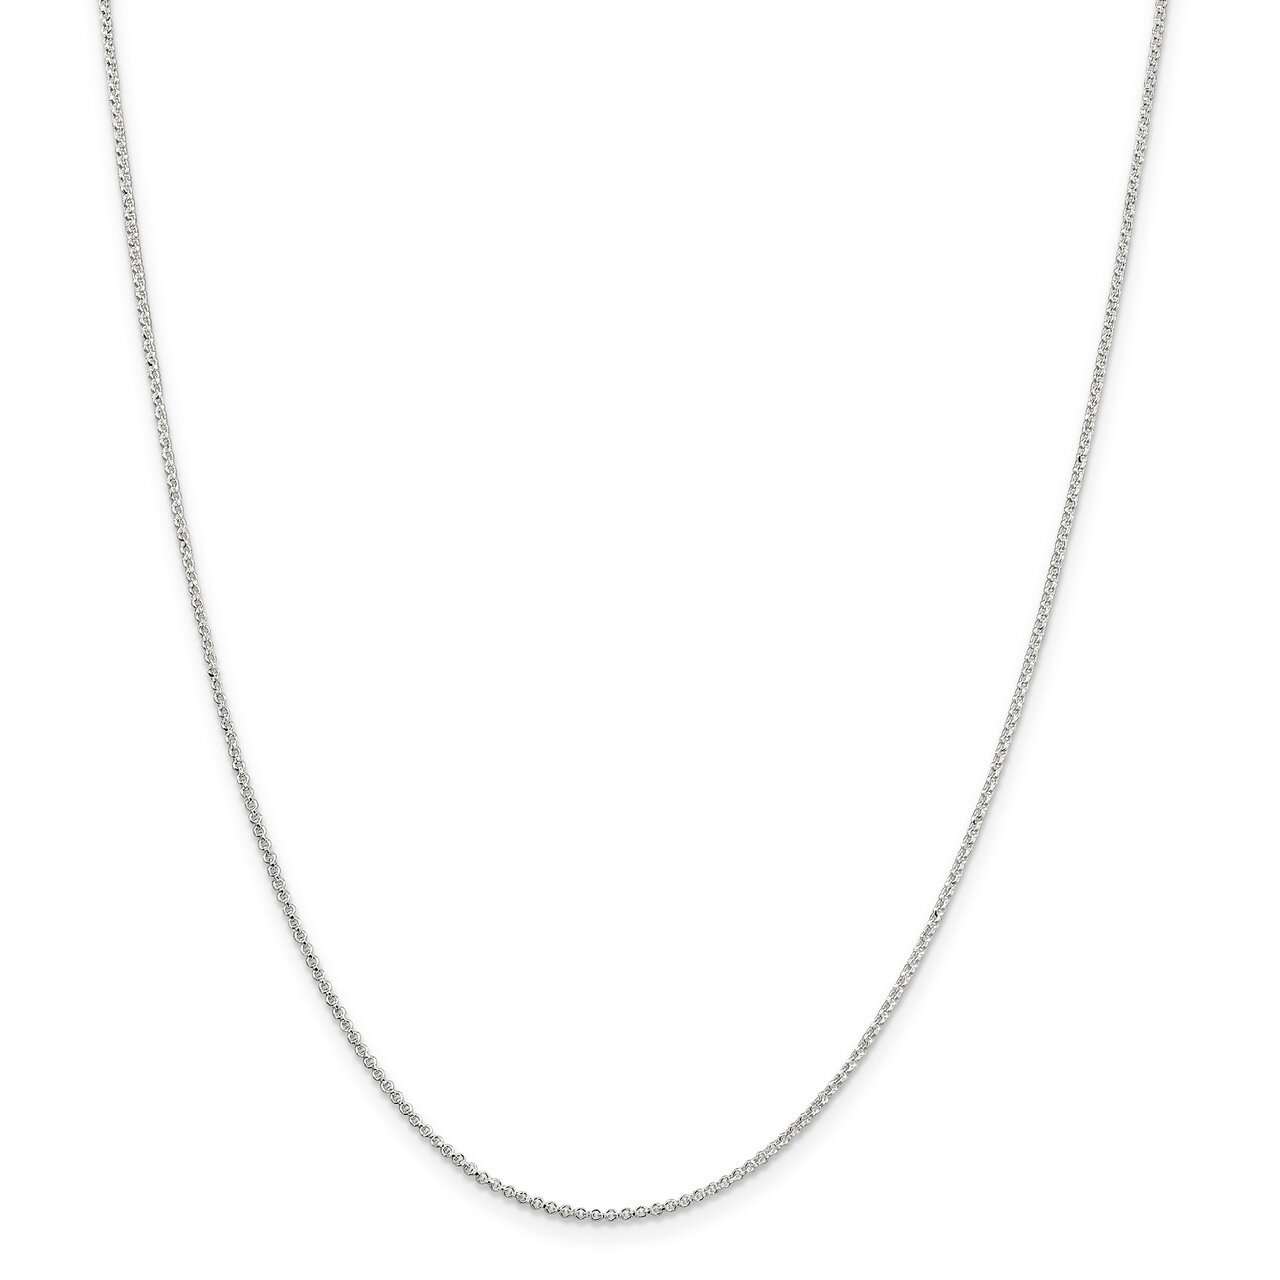 16 Inch 1.4 mm Polished Rolo Chain Sterling Silver QPE71-16